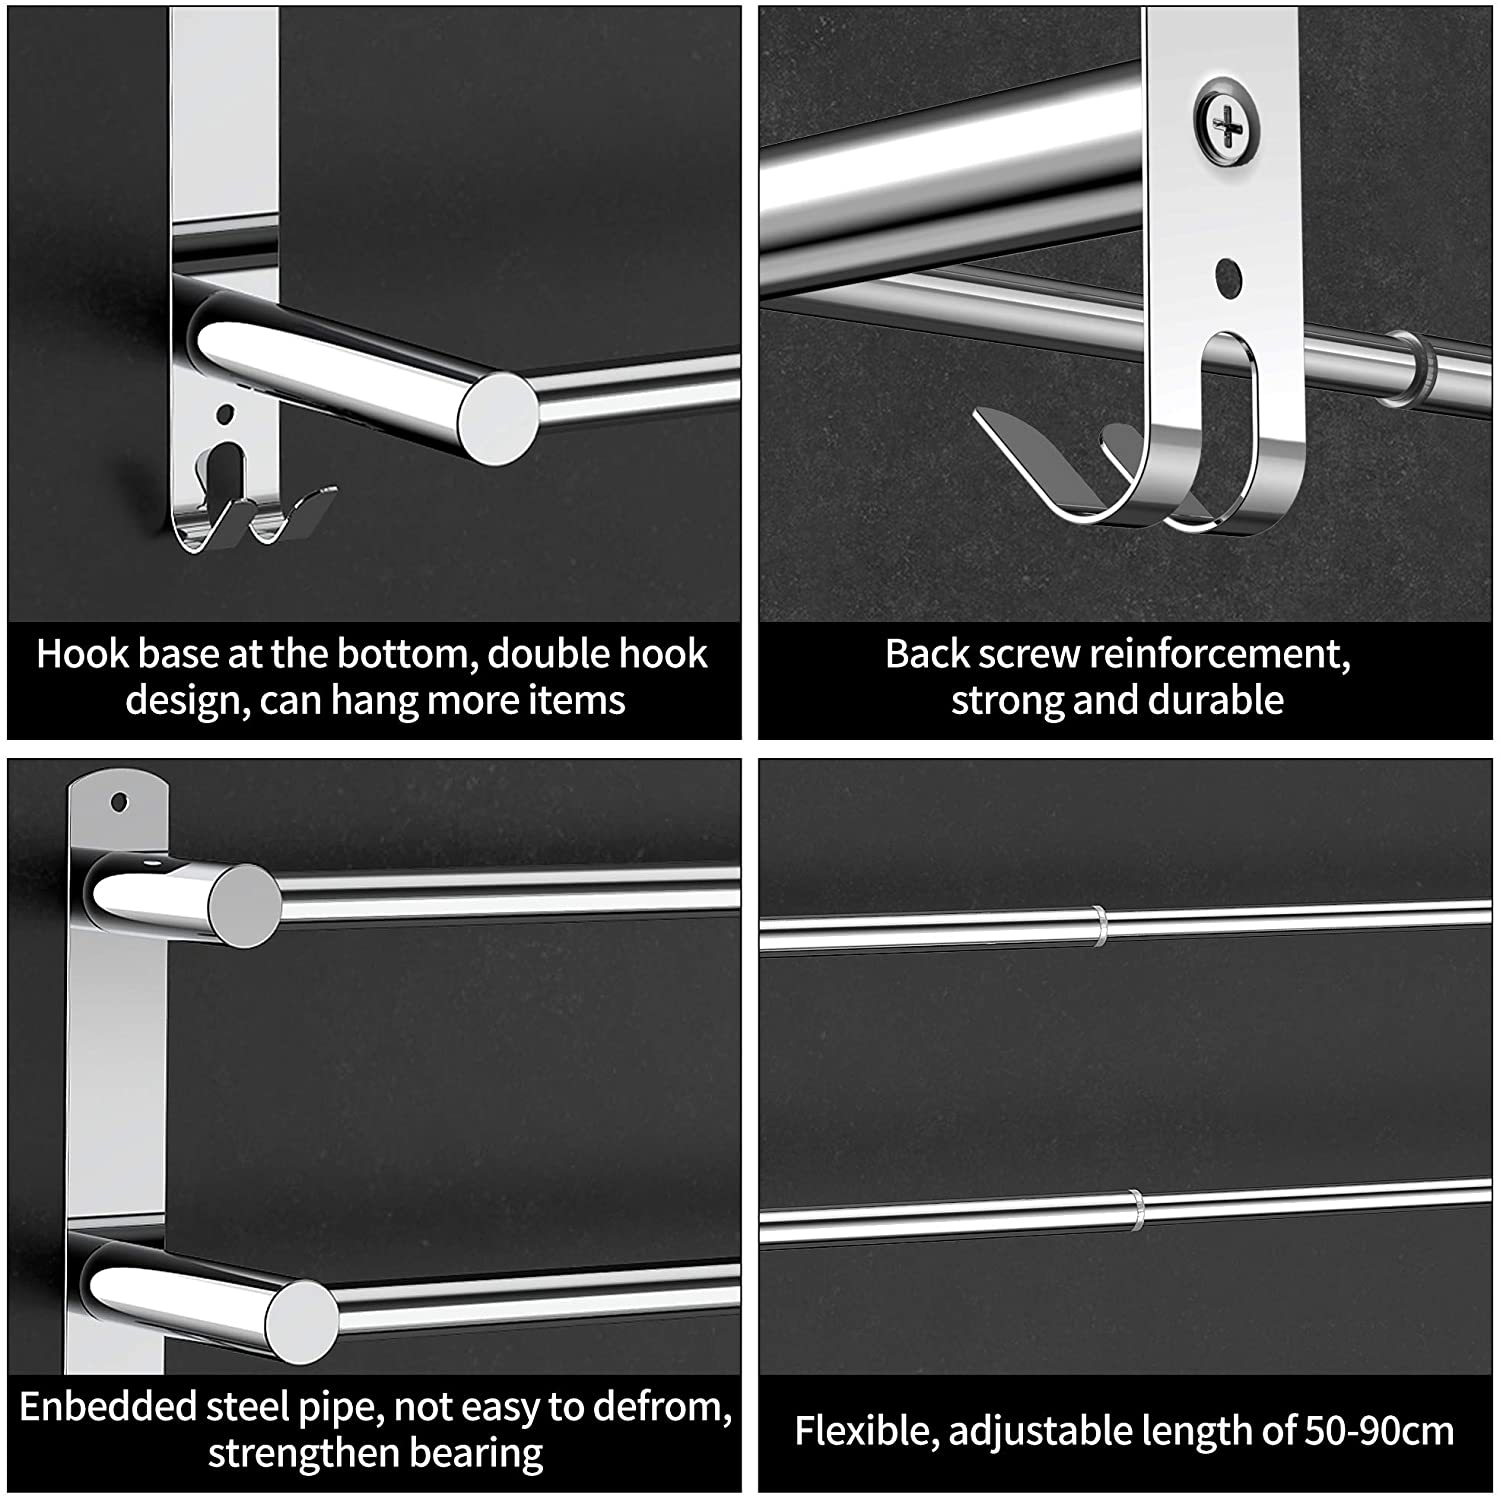 Stretchable 45-75 cm Towel Bar for Bathroom and Kitchen (Three Bars)